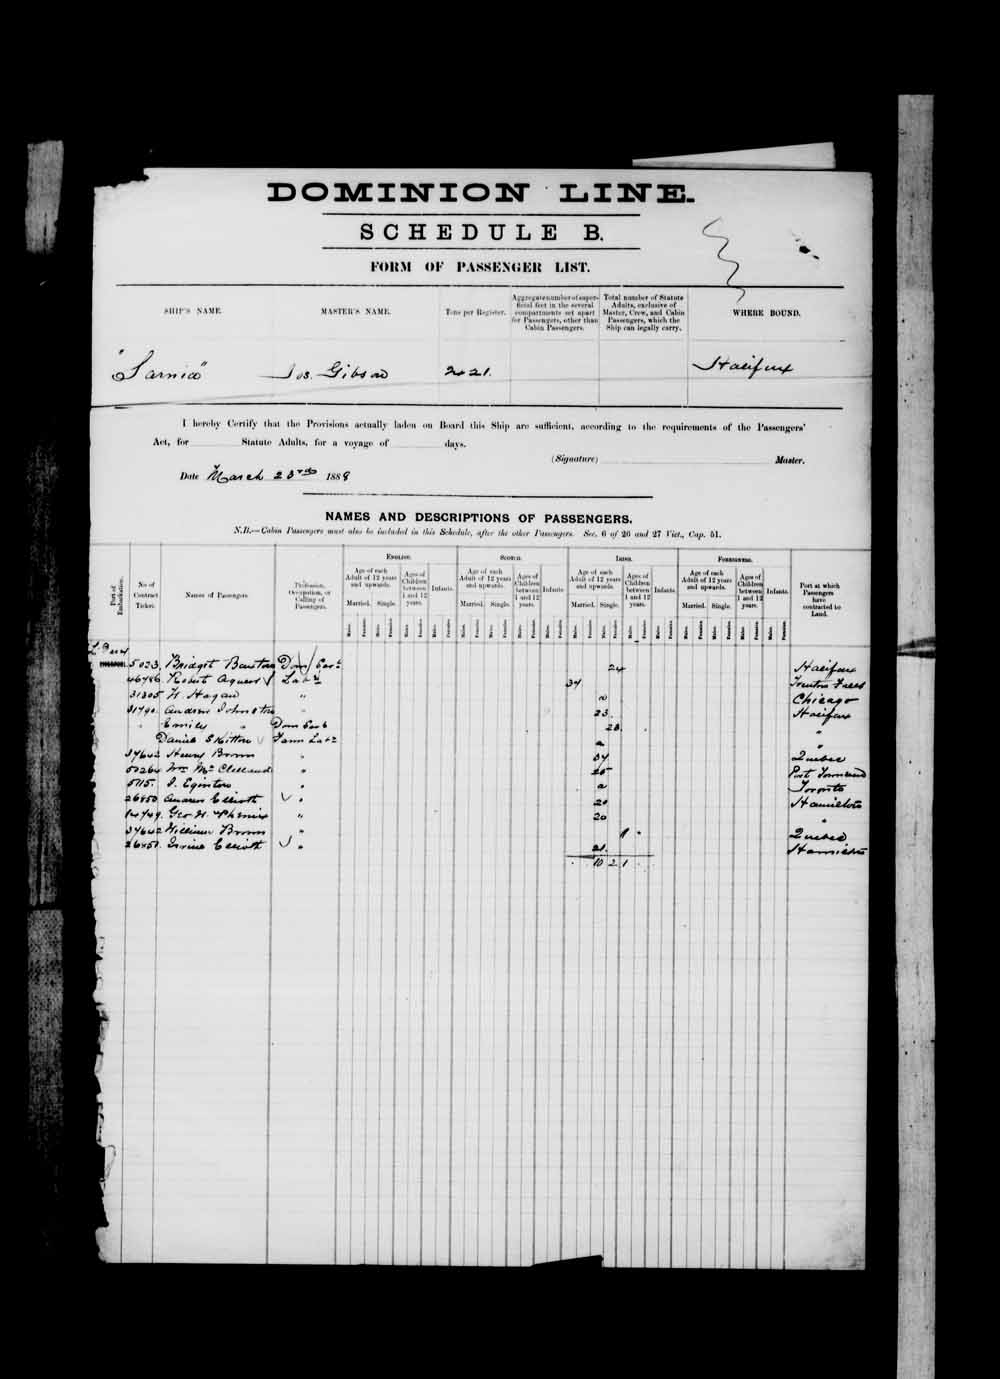 Digitized page of Passenger Lists for Image No.: e003674508